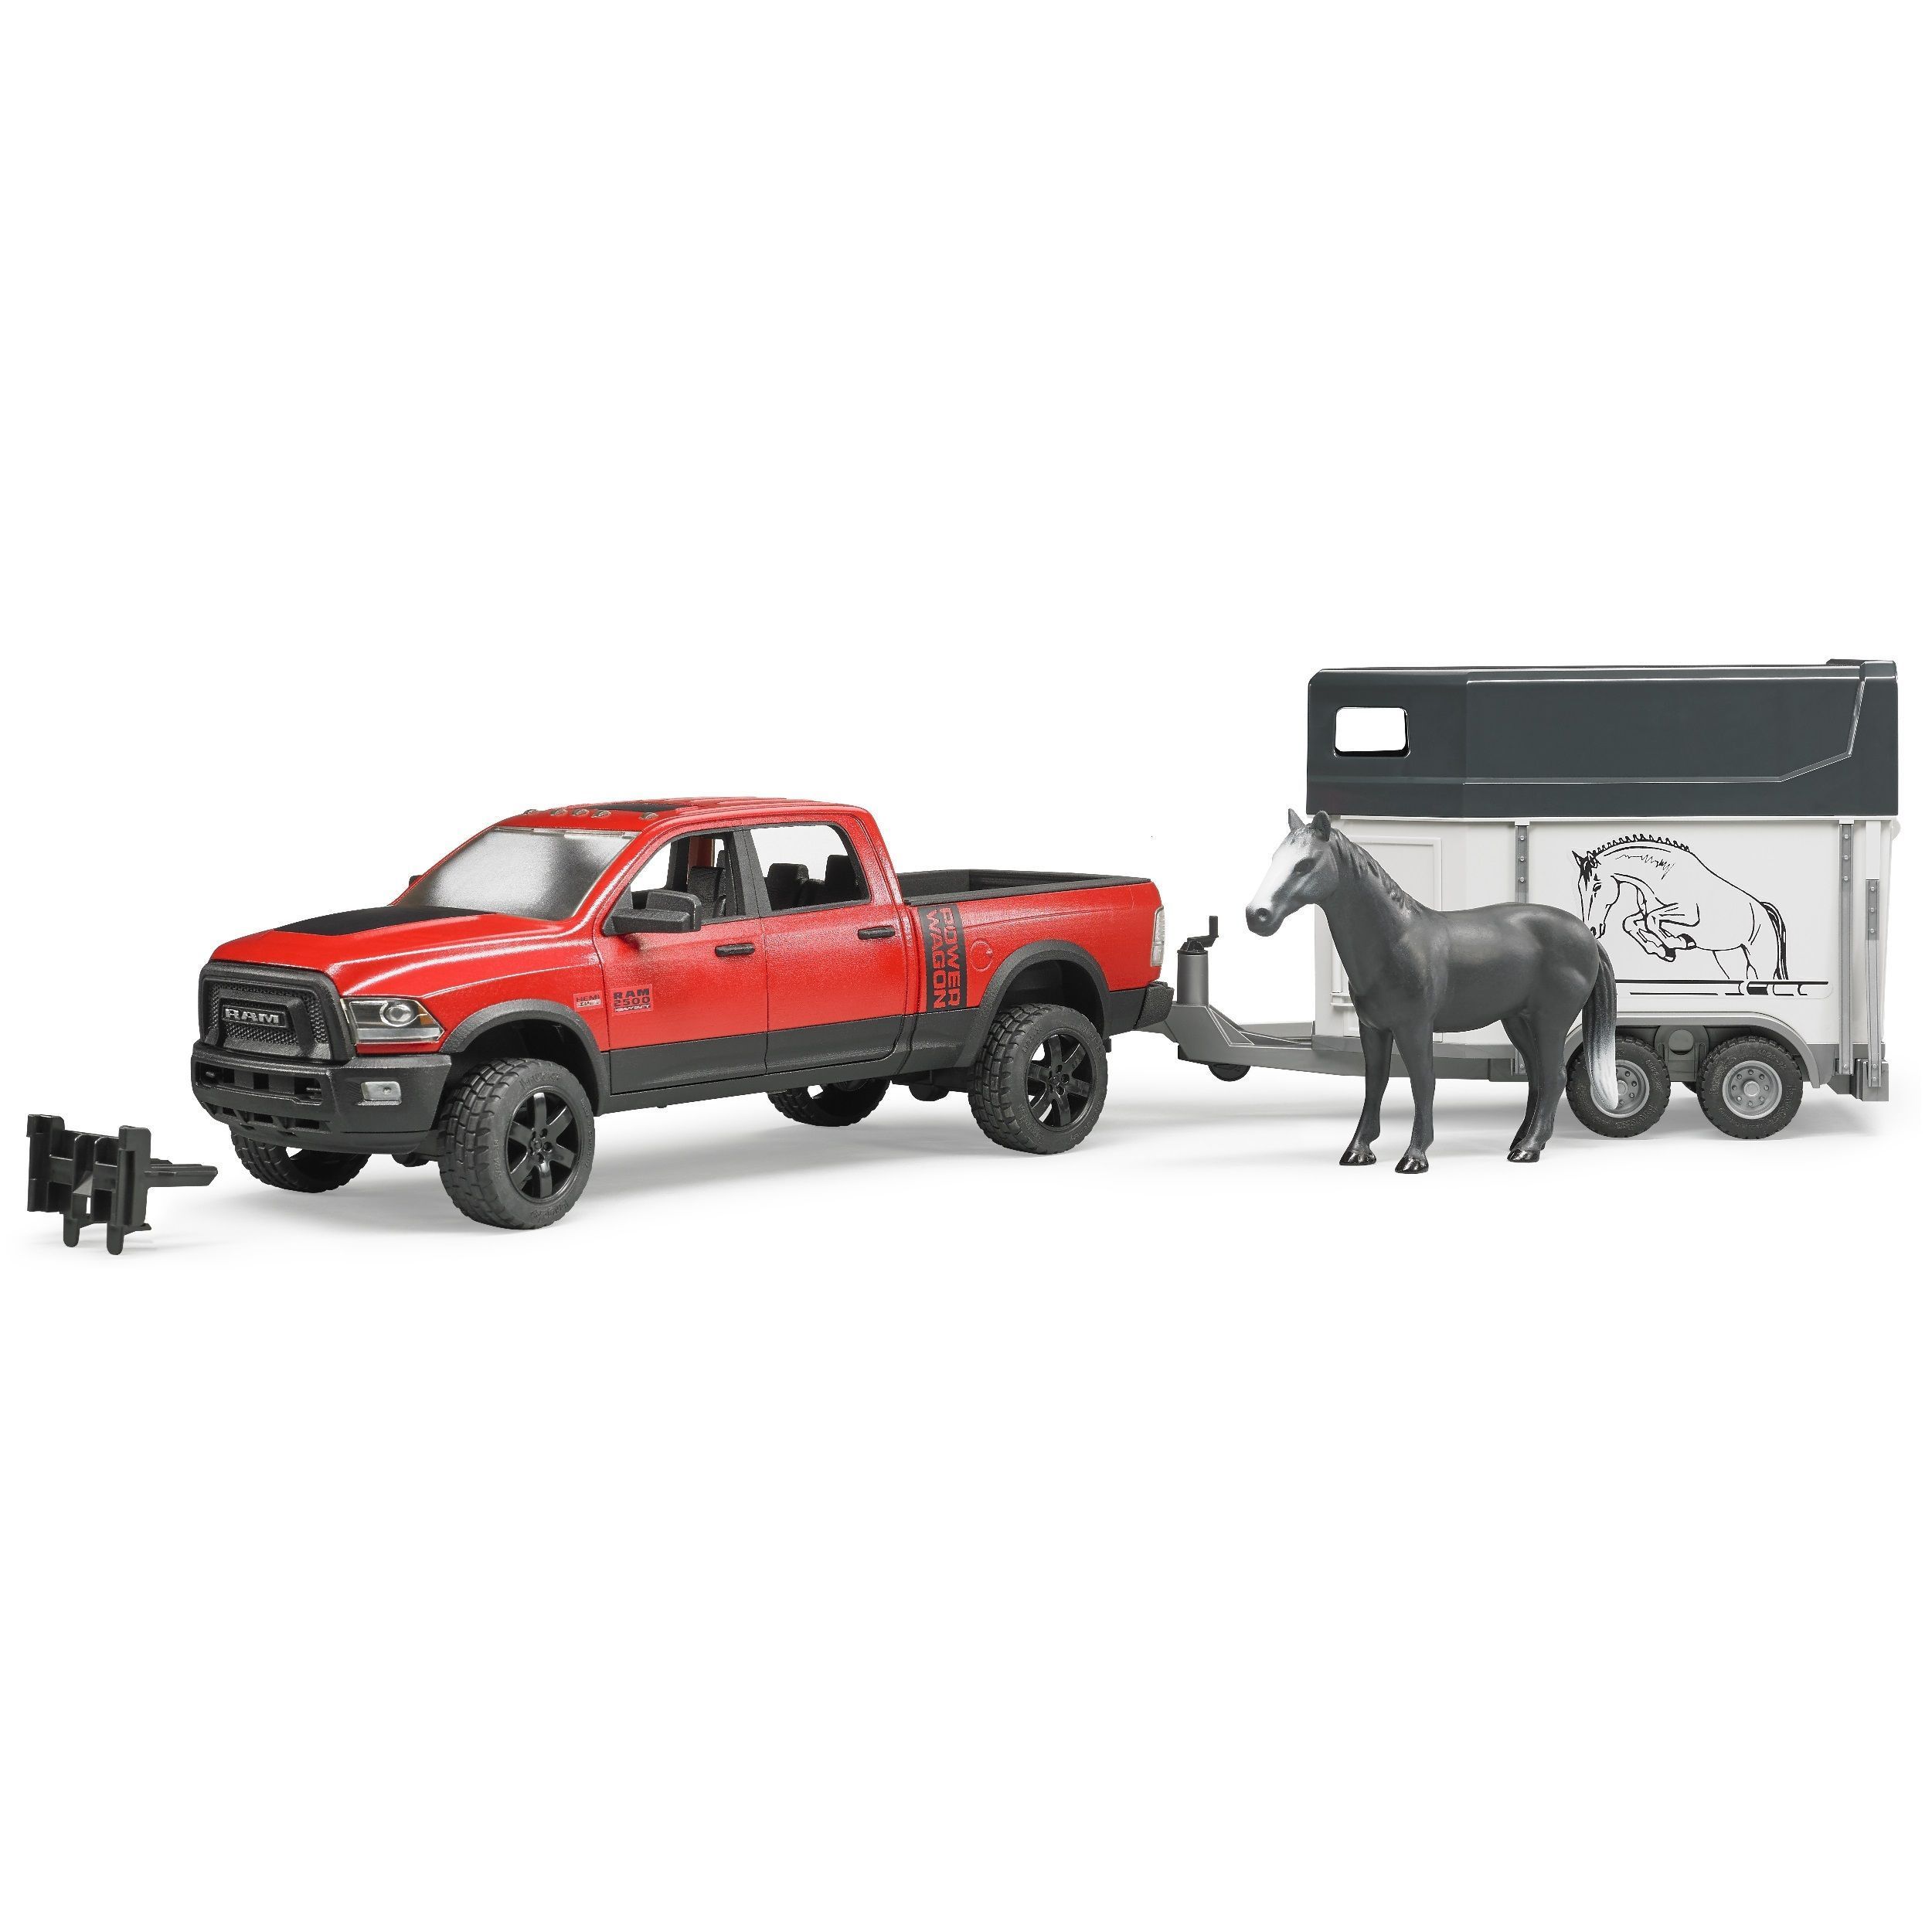 ide Gammeldags Tether Toys & Co. - Bruder Trucks - Dodge Ram 2500 Power Wagon Pickup Truck Red  with Horse Trailer